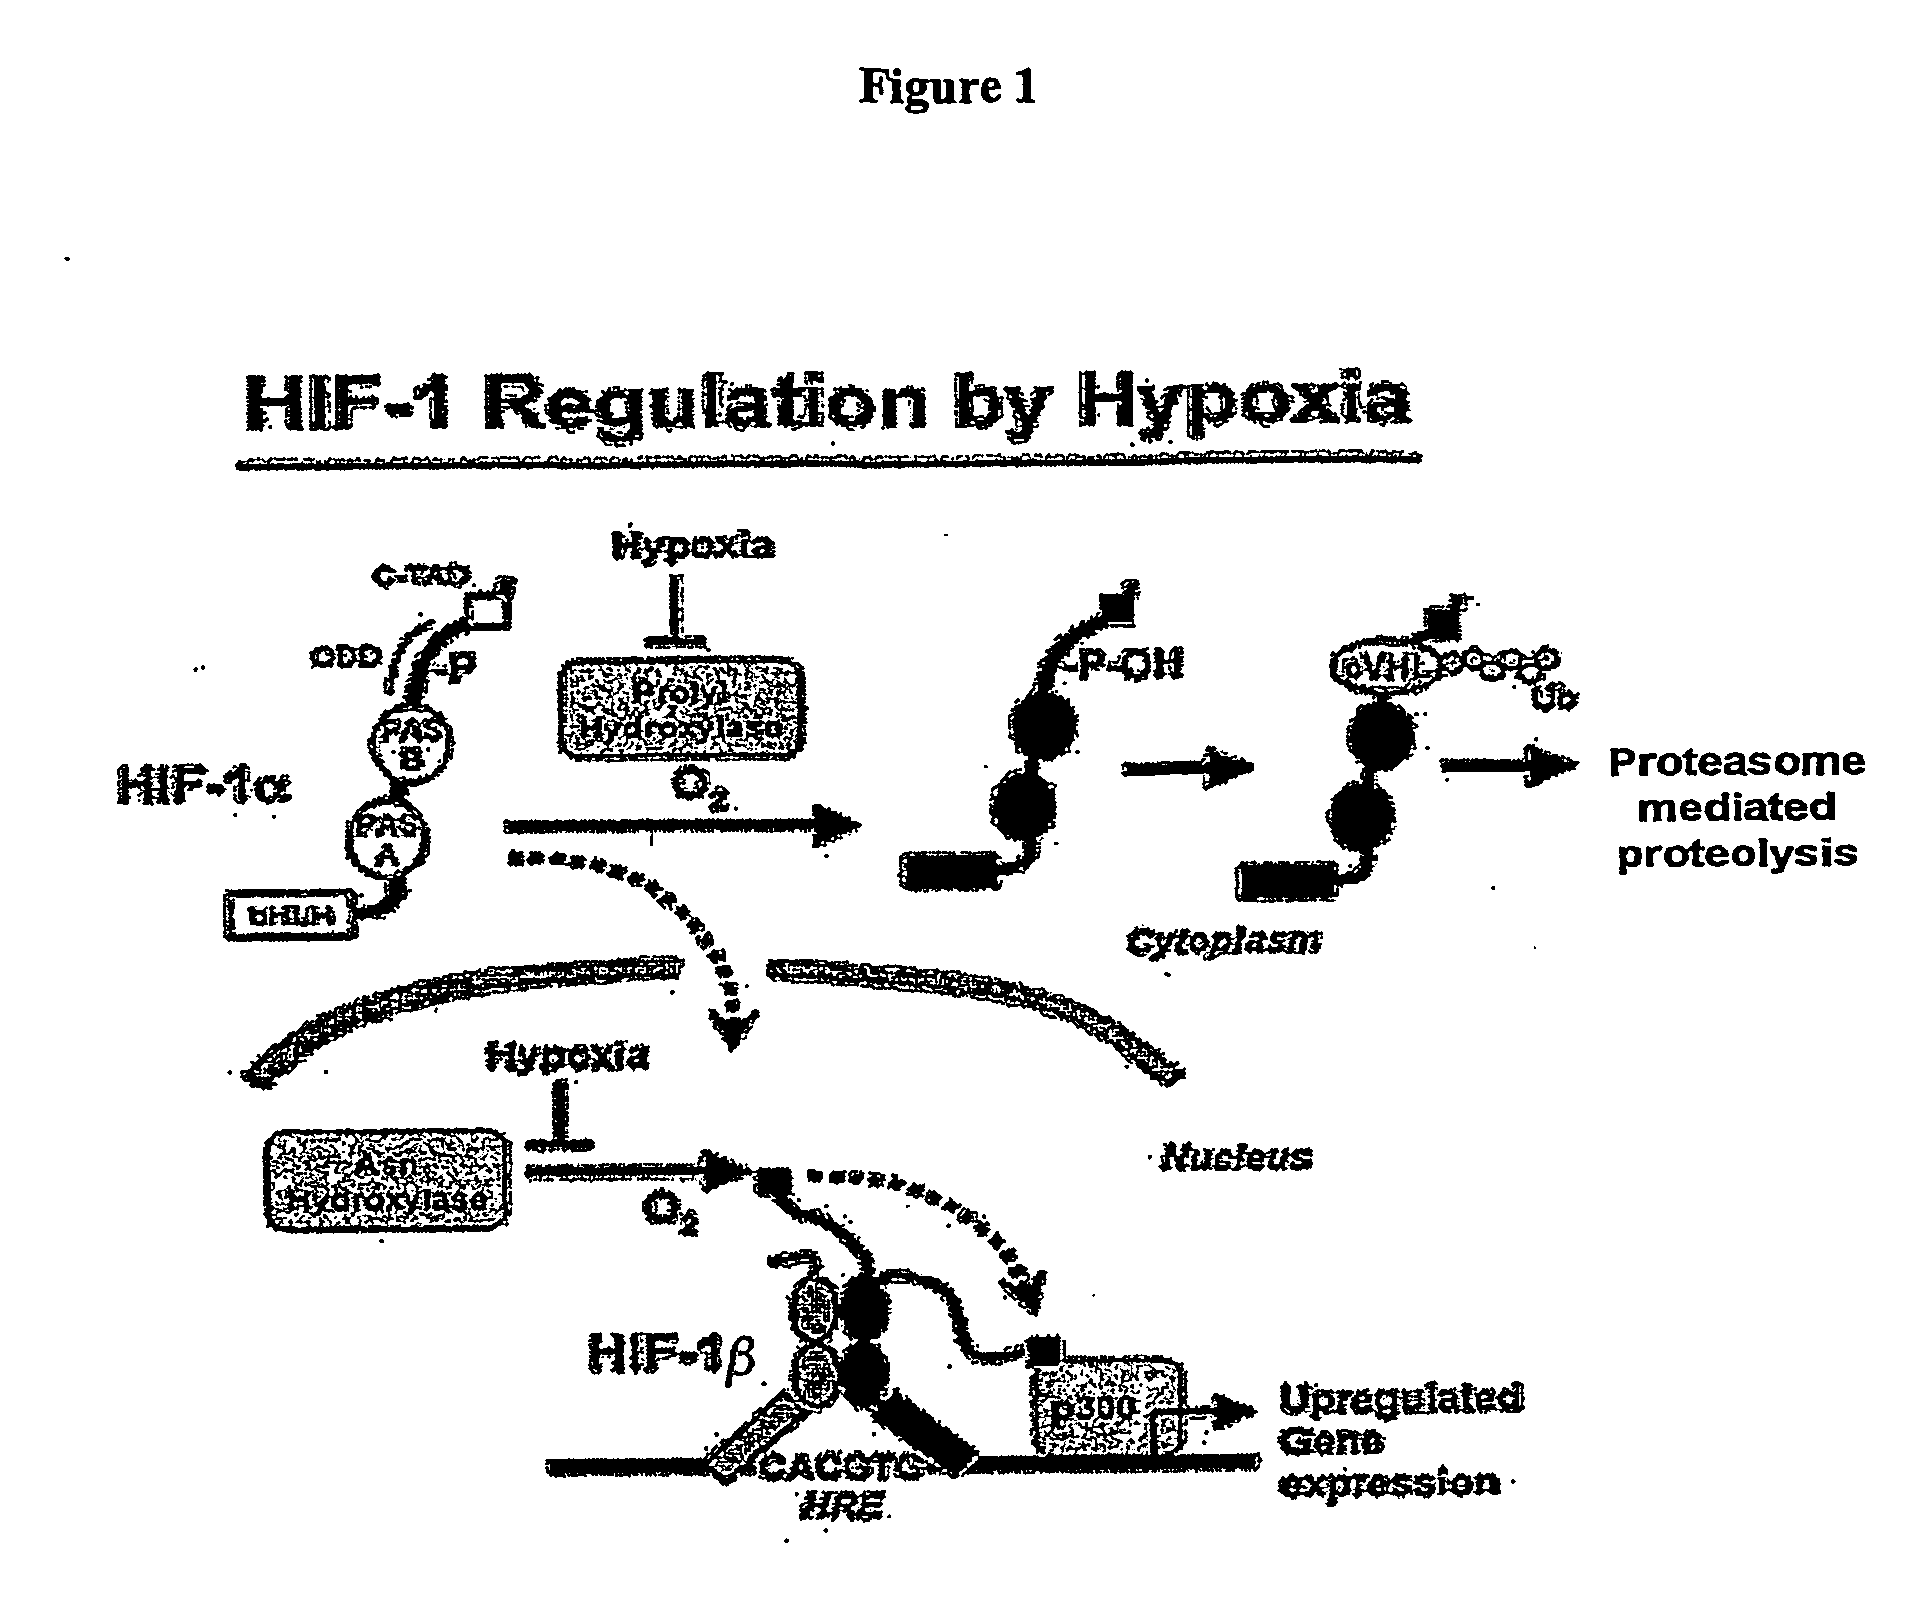 Activation of hypoxia-inducible gene expression